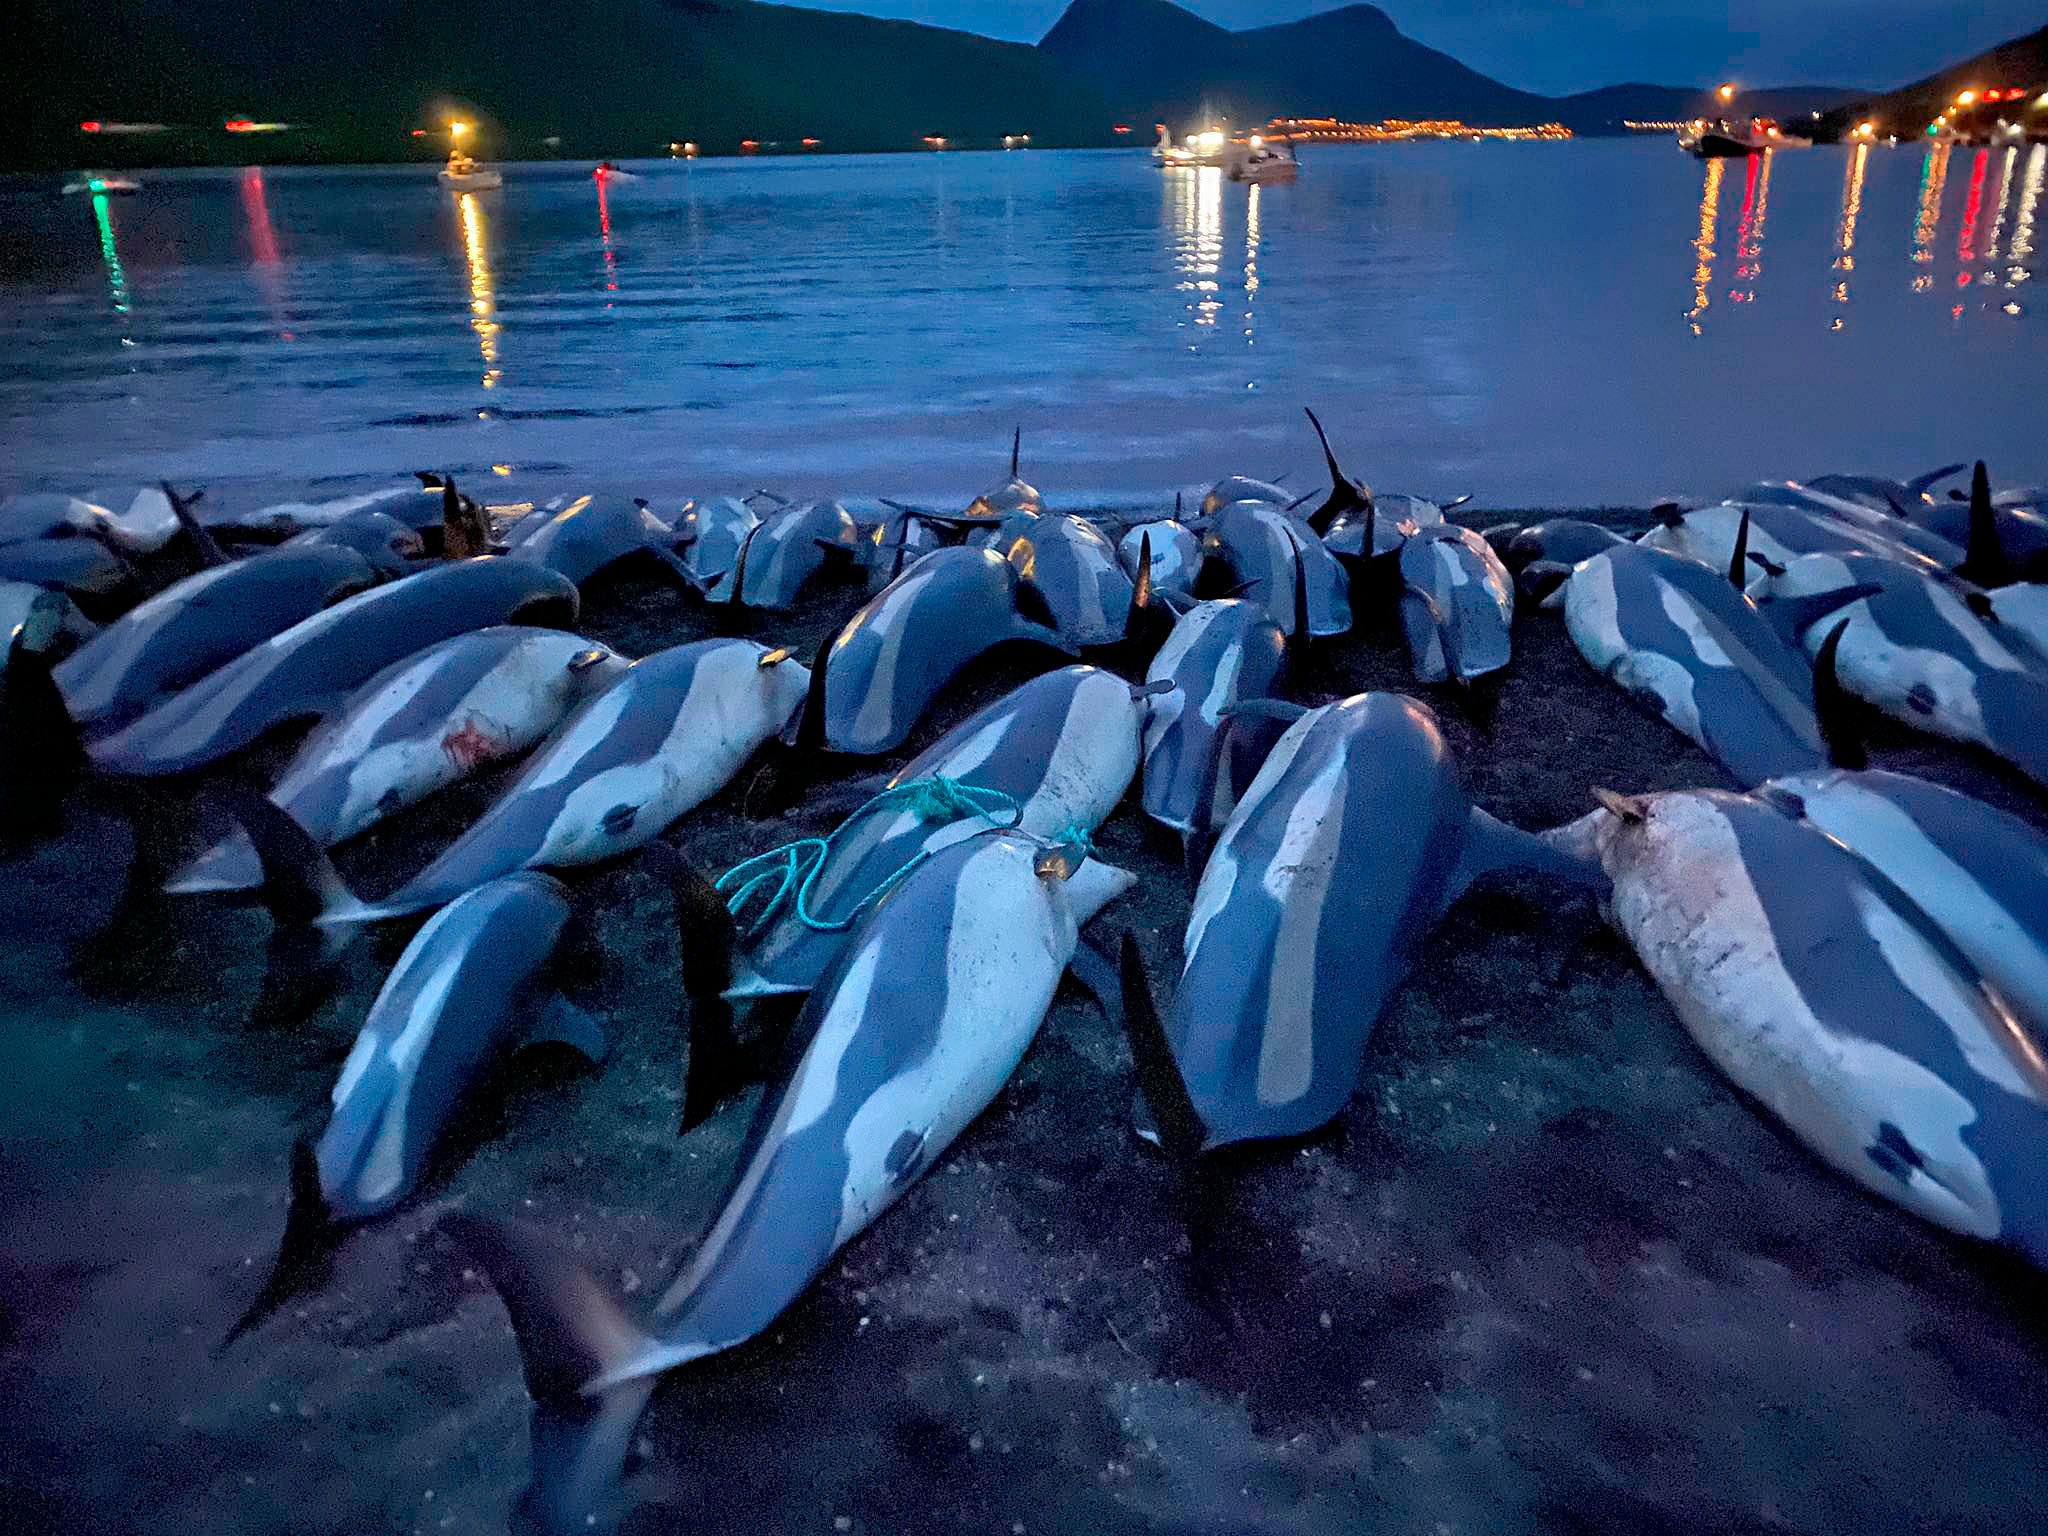 Animal rights group calls for end to dolphin slaughter in Faroe Islands